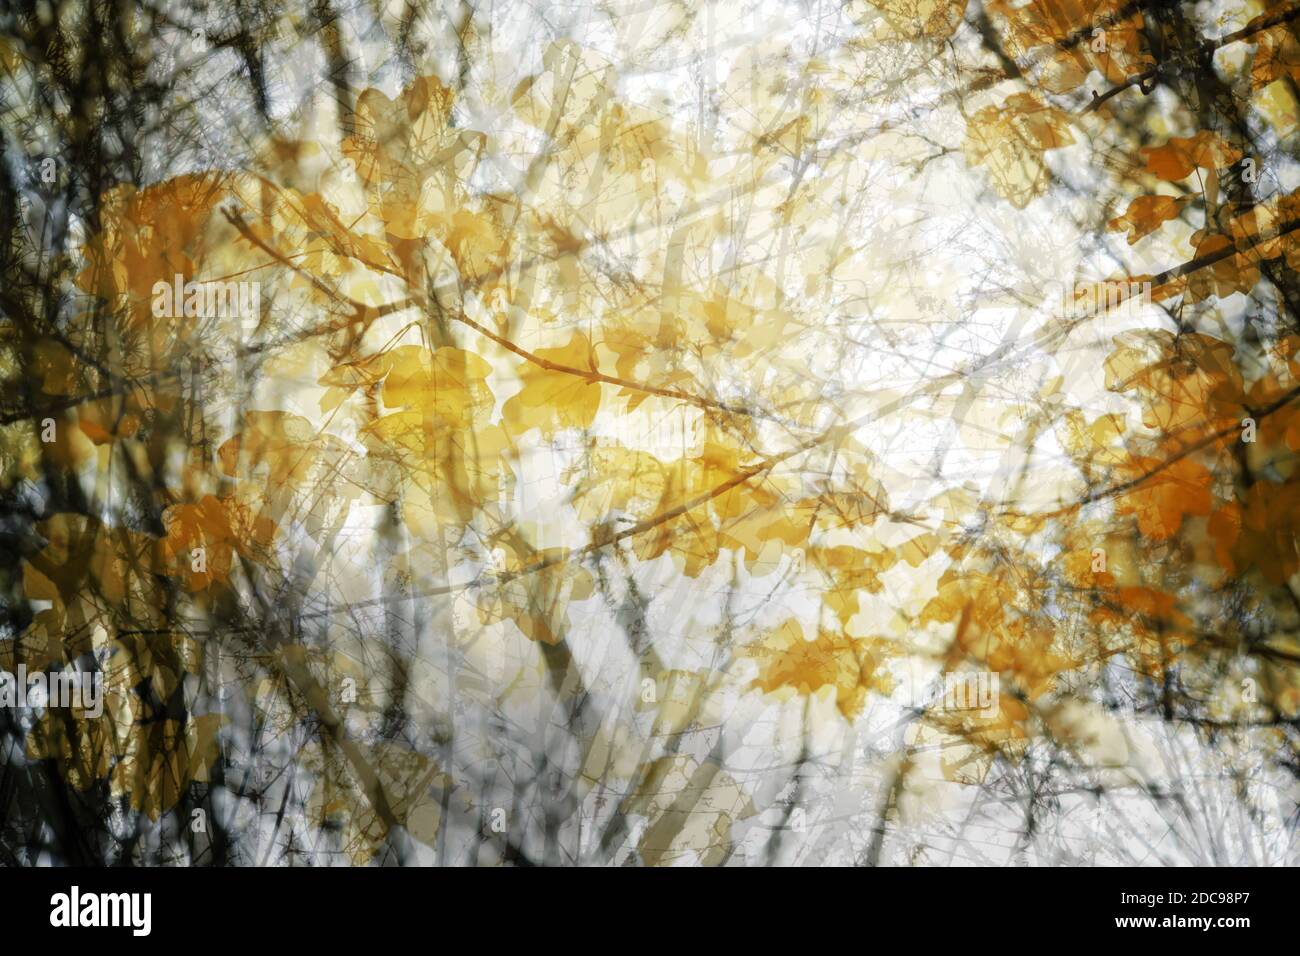 Golden autumn leaves as an abstract nature background due to multiple exposure, copy space Stock Photo